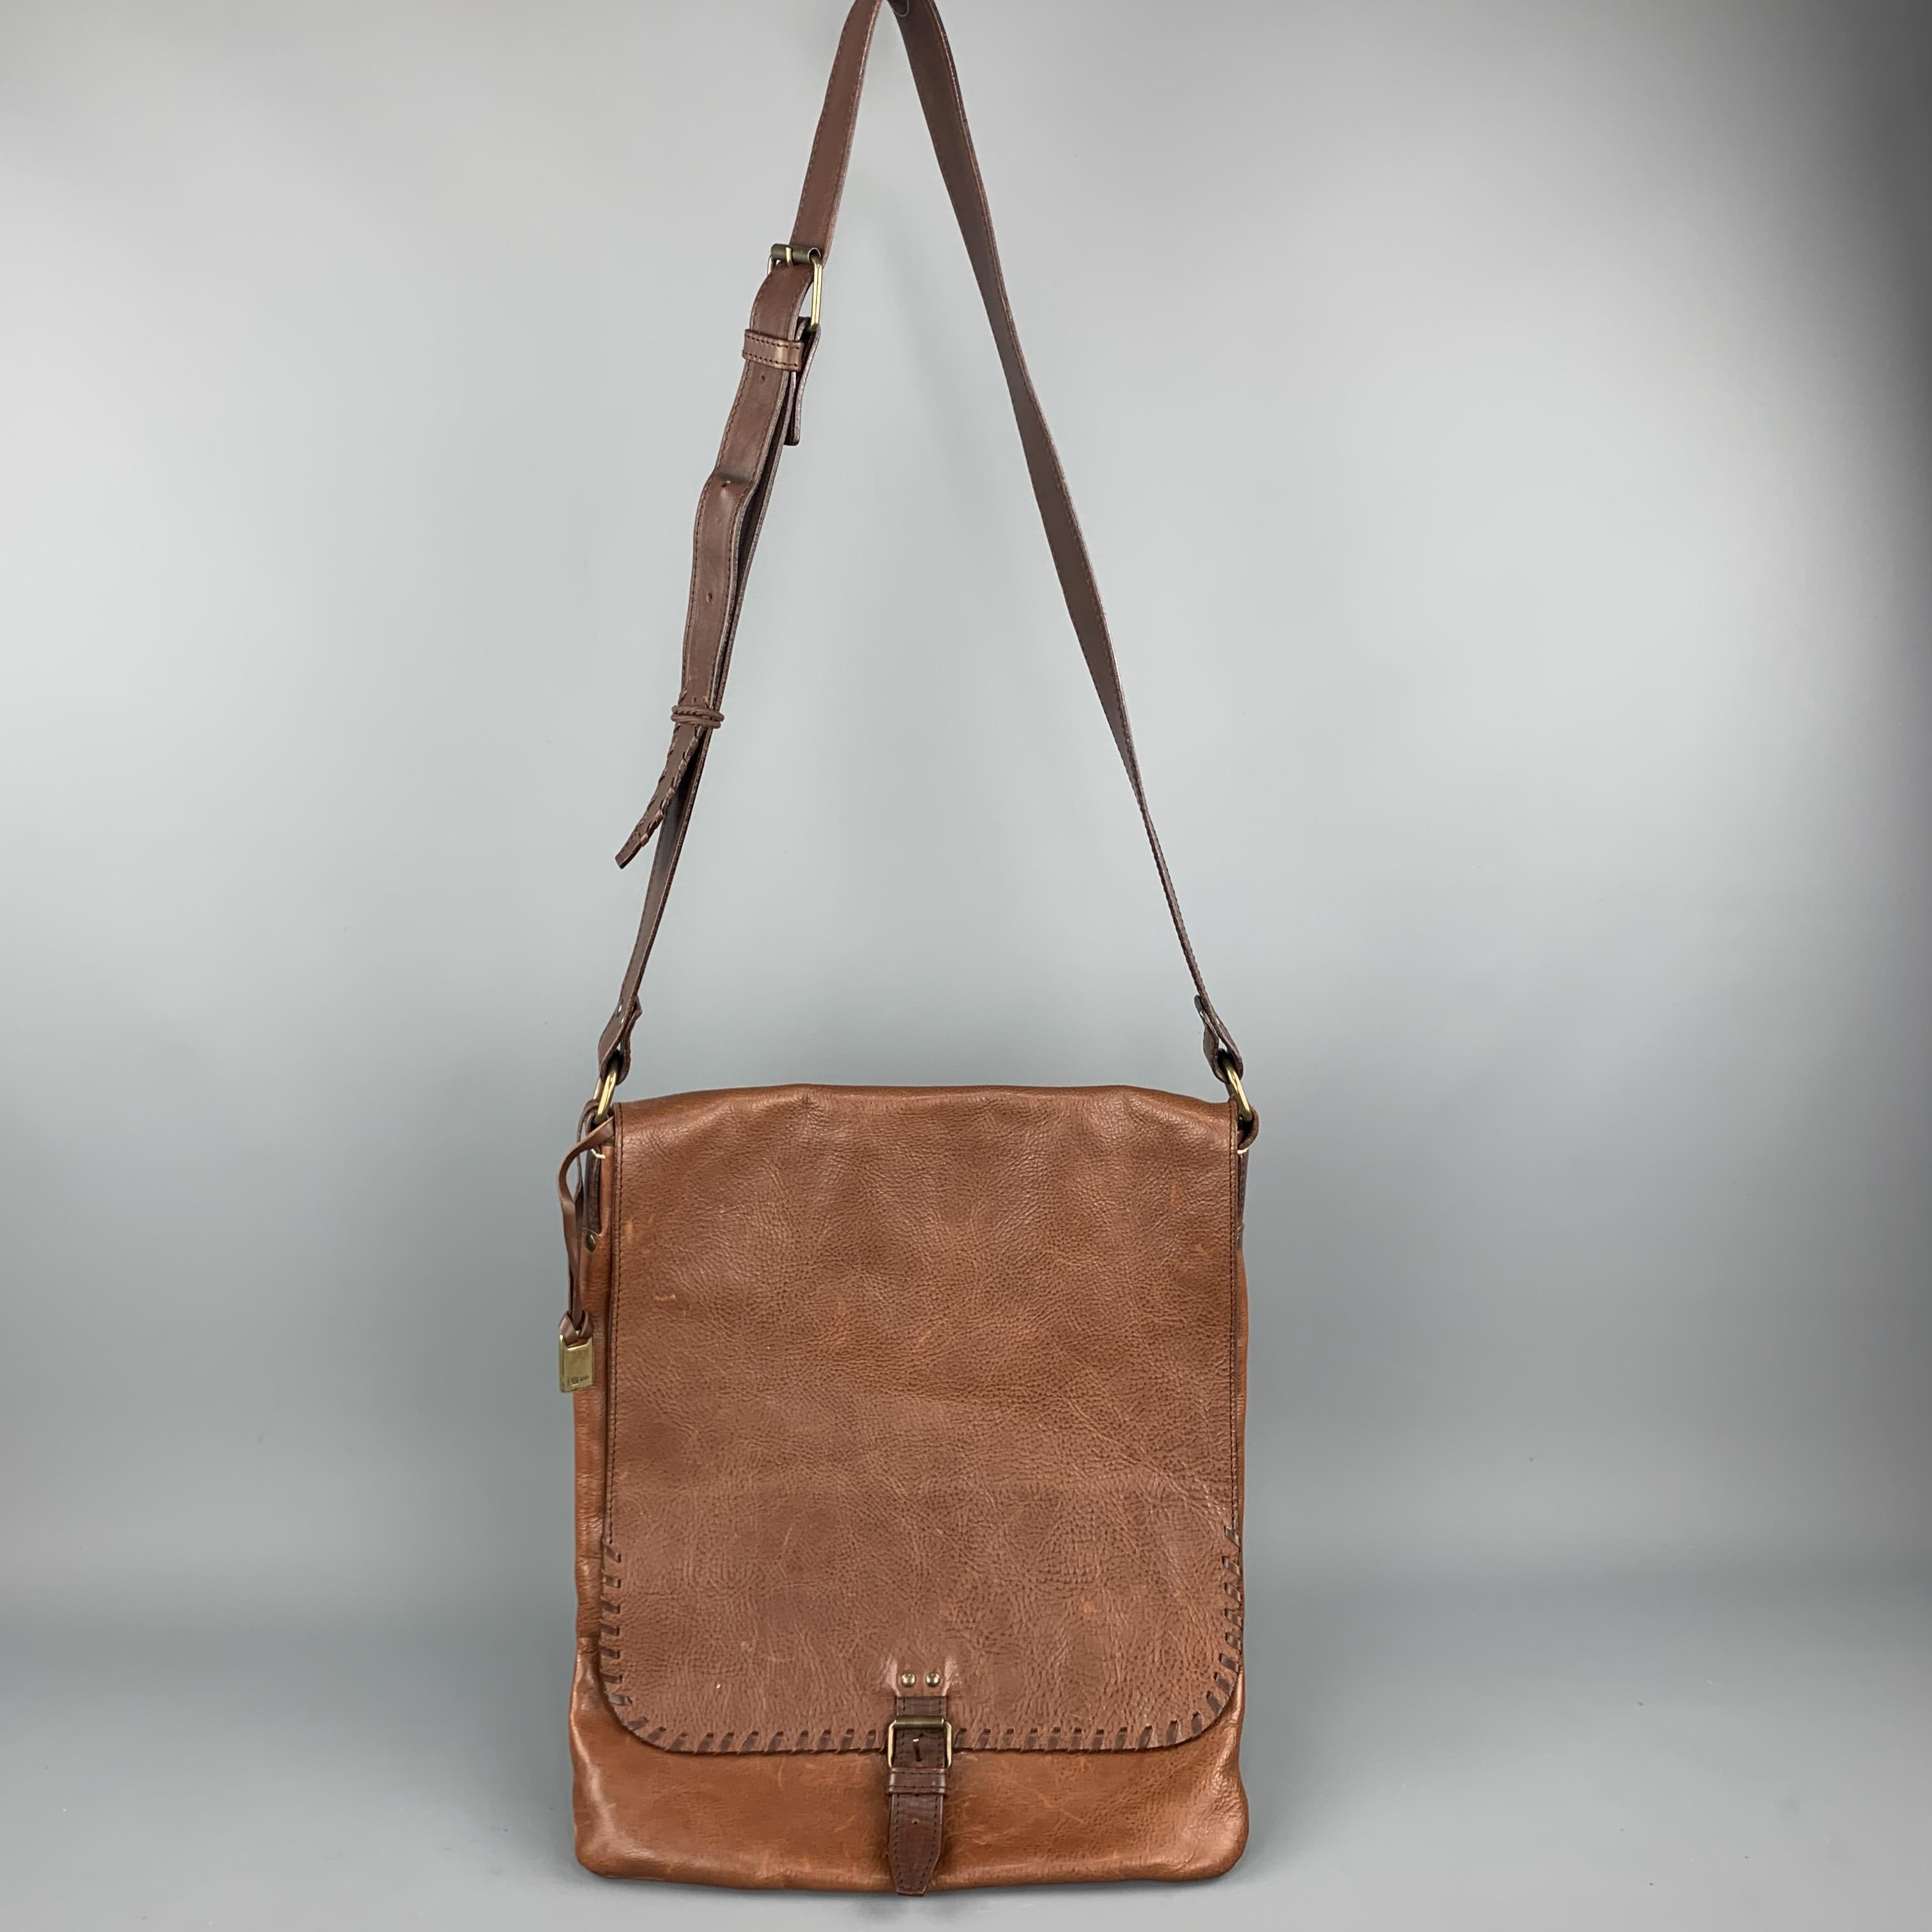 JOHN VARVATOS messenger bag comes in tan pebbled leather with a frontal flap, mock buckle snap closure, whipstitch trim, and crossbody strap. Wear throughout. Stain on back. As-is. Hand Made in Italy. 

Good Pre-Owned Condition.
Original Retail